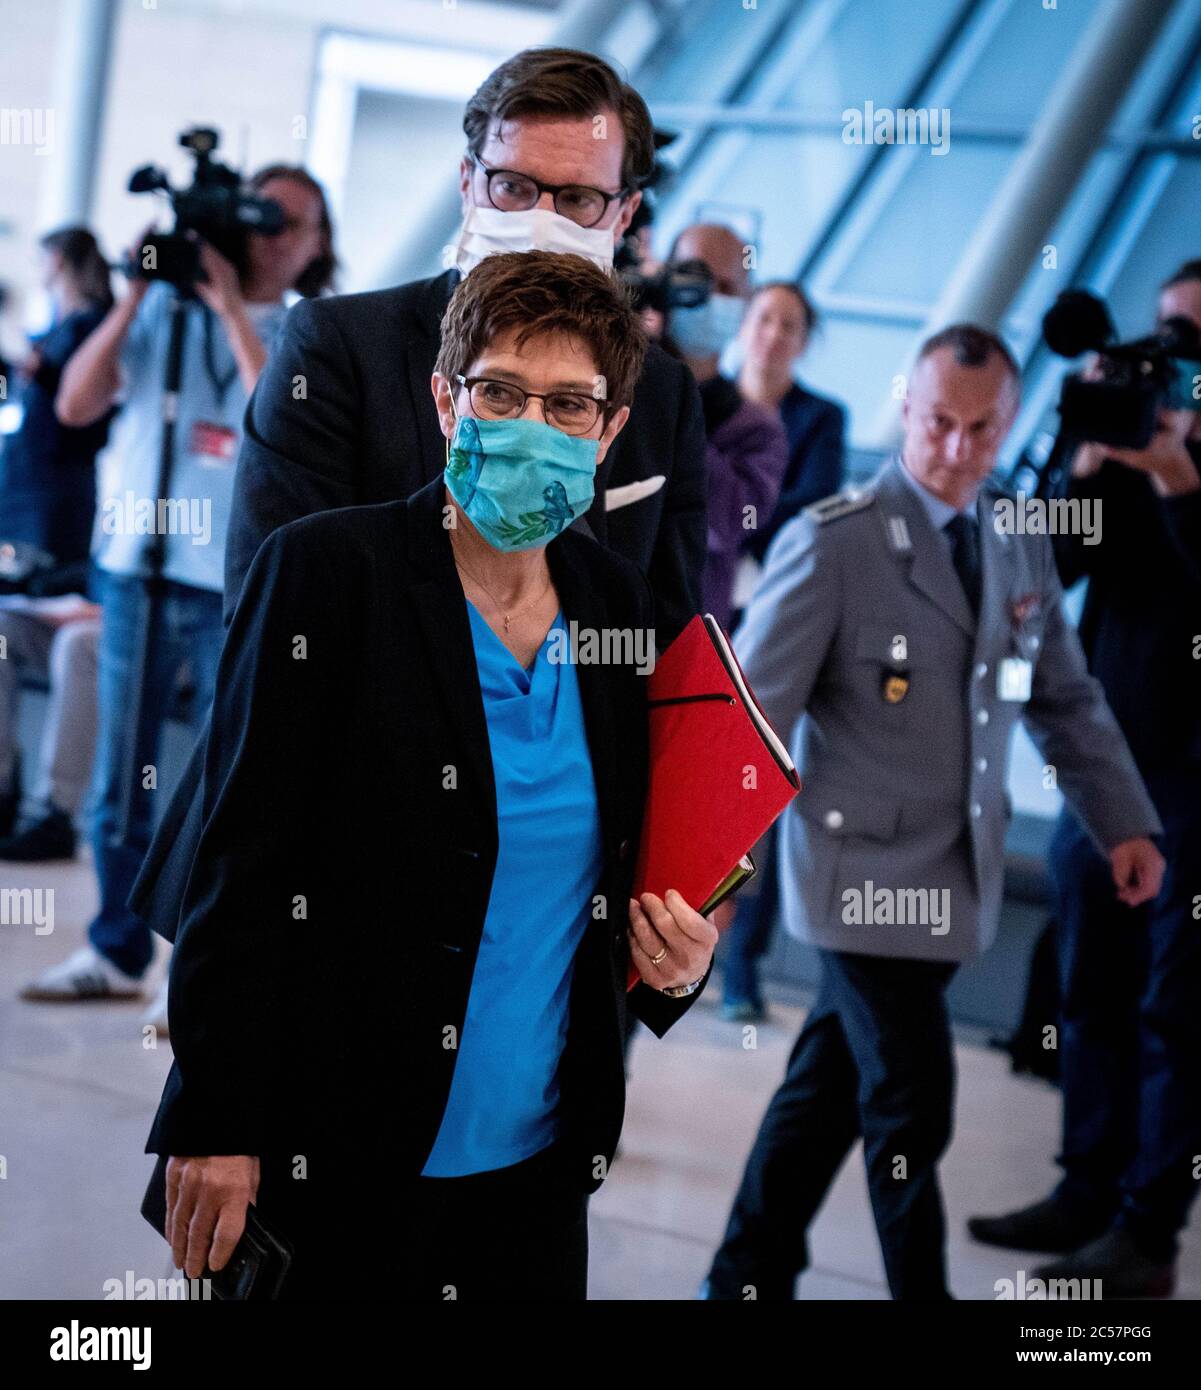 01 July 2020, Berlin: Annegret Kramp-Karrenbauer (CDU), Federal Minister of Defense and CDU Federal Chairwoman, joins the Bundestag's Defense Committee with mouth-nose protection. The topic is right-wing extremism in the elite force KSK. Since 2017, the Special Forces Command has been making headlines because of several cases of right-wing extremism. One suspected soldier even had an arsenal dug up. The Defence Minister has therefore had a reform concept developed to counteract extremist tendencies. She is now presenting this to the Defence Committee. Photo: Kay Nietfeld/dpa Stock Photo